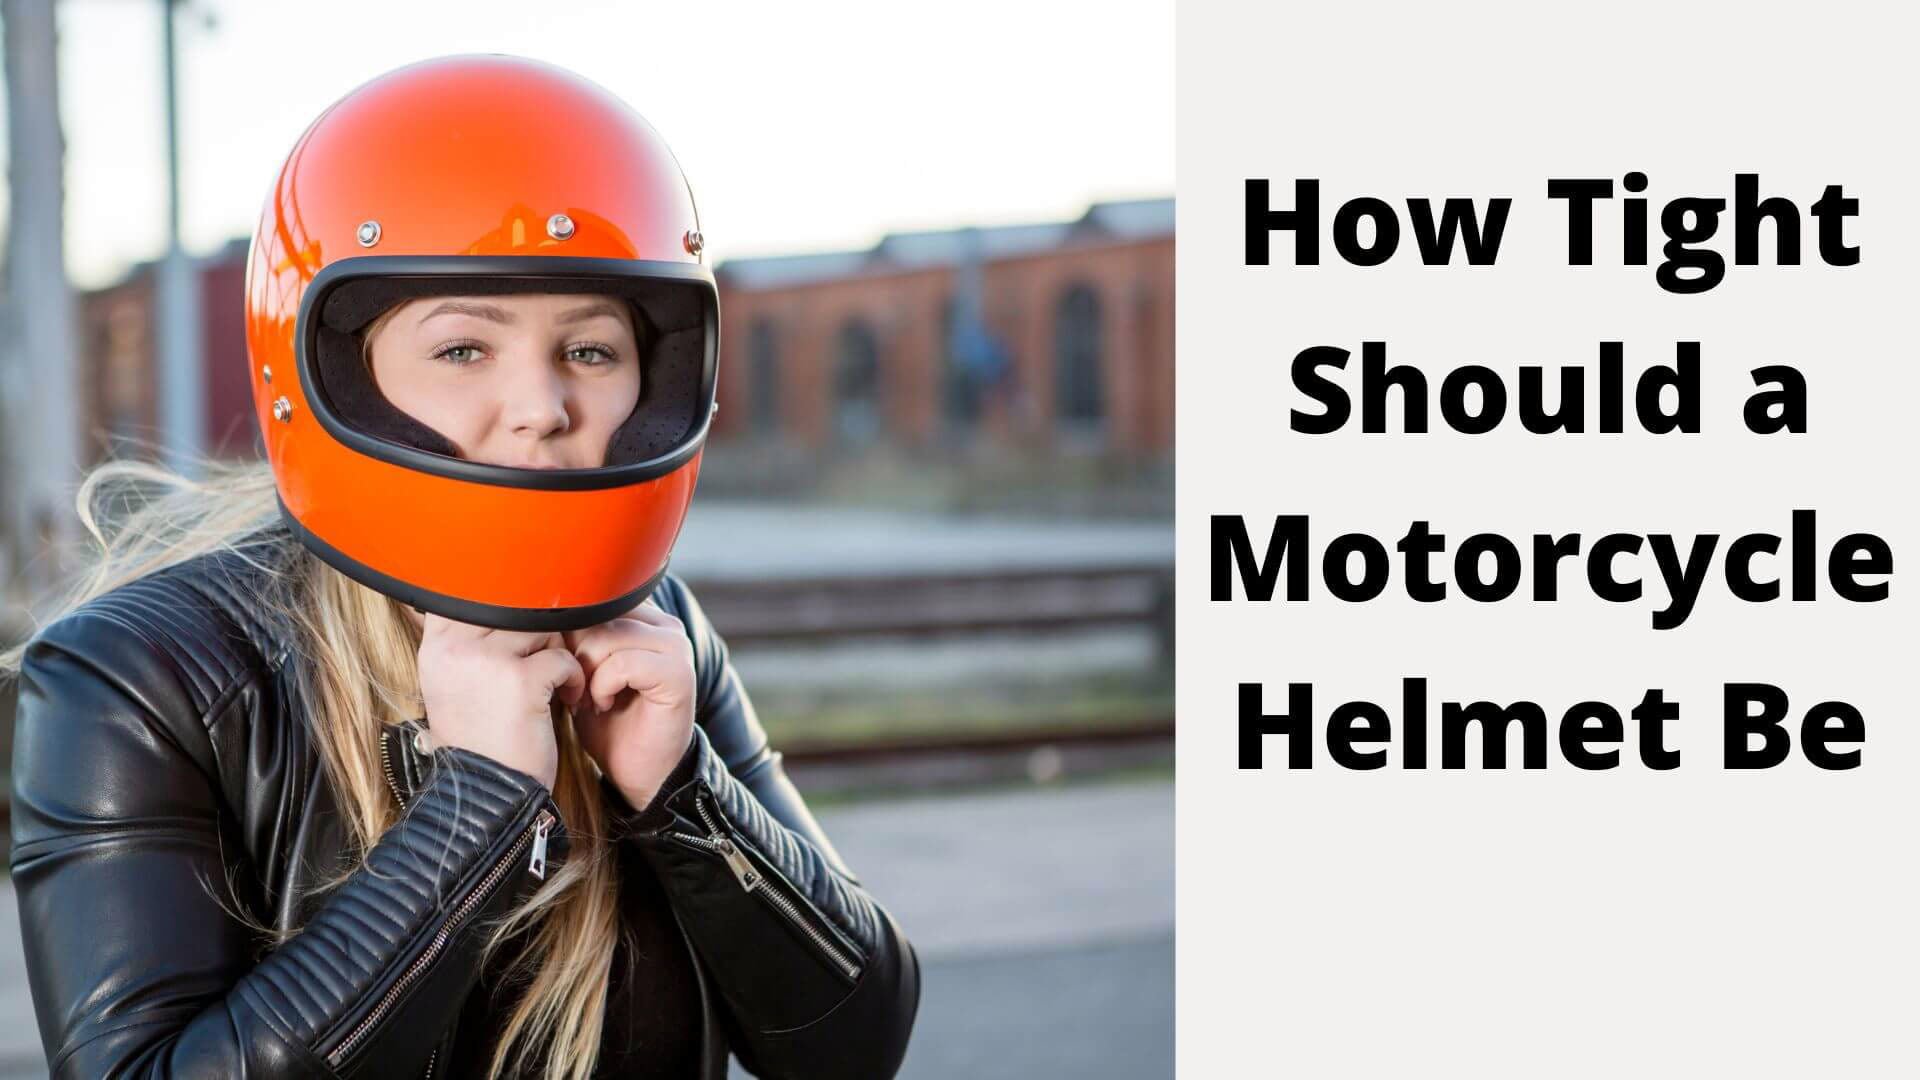 How Tight Should a Motorcycle Helmet Be